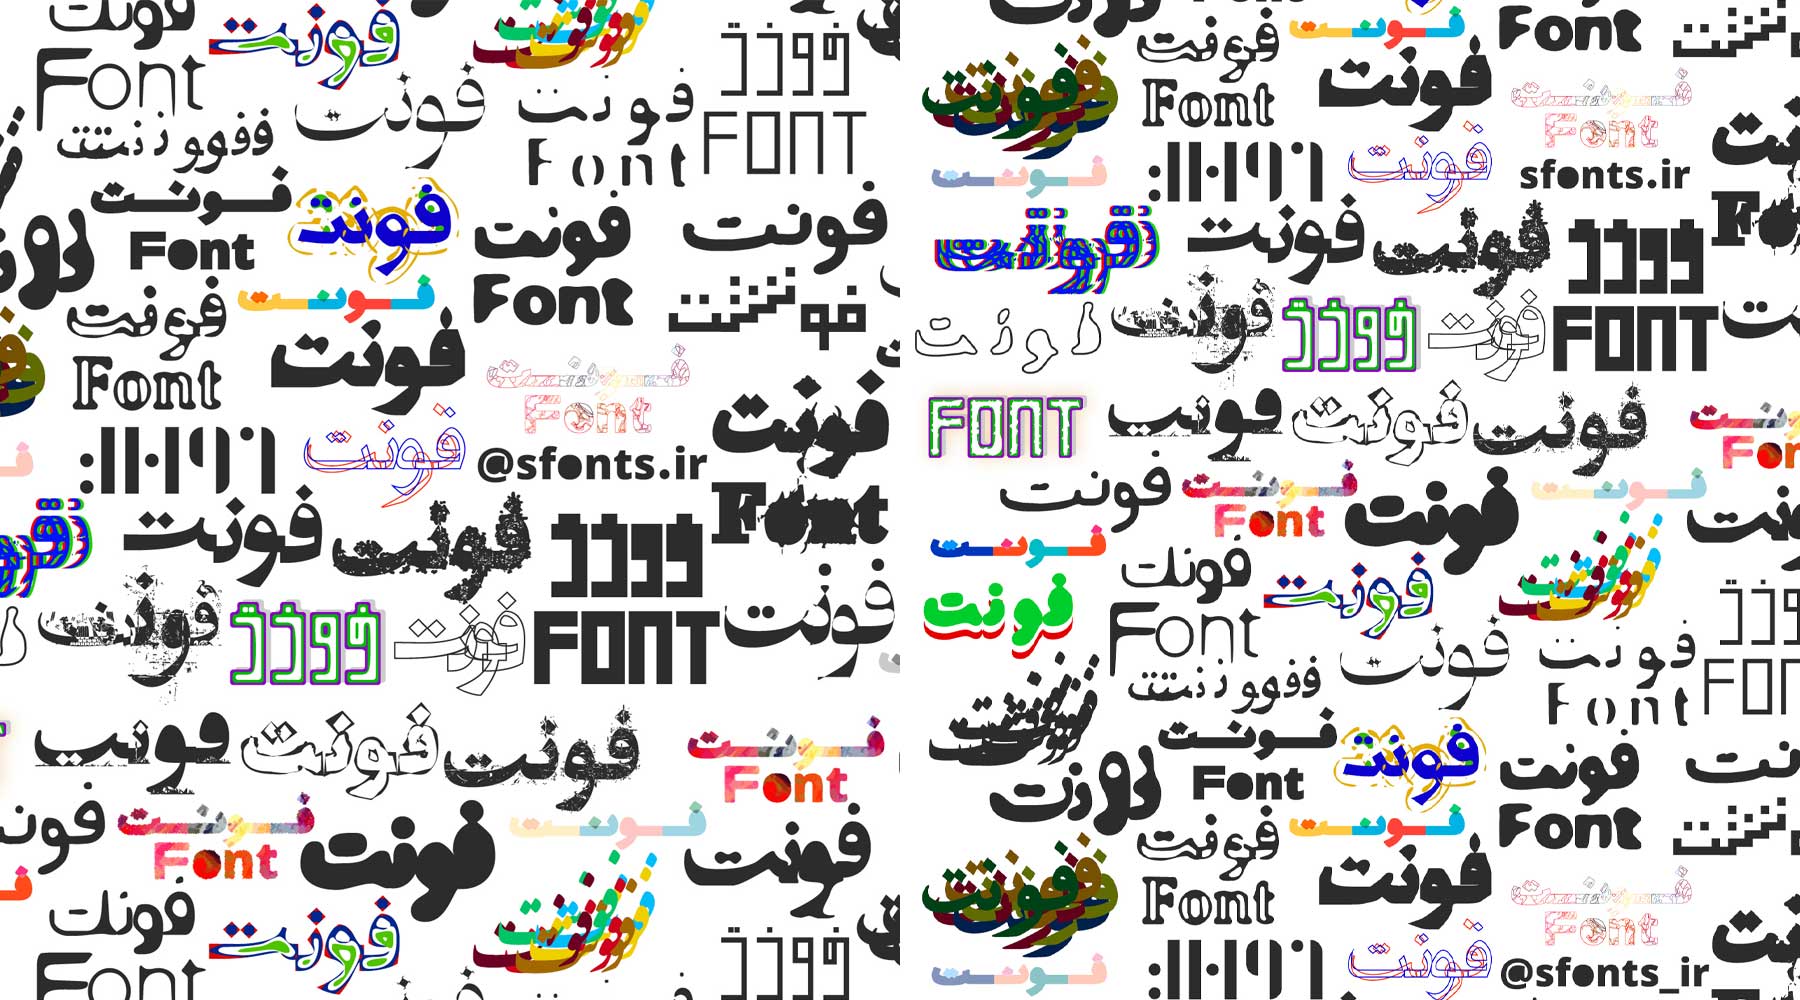 What are the best free fonts in Persian?